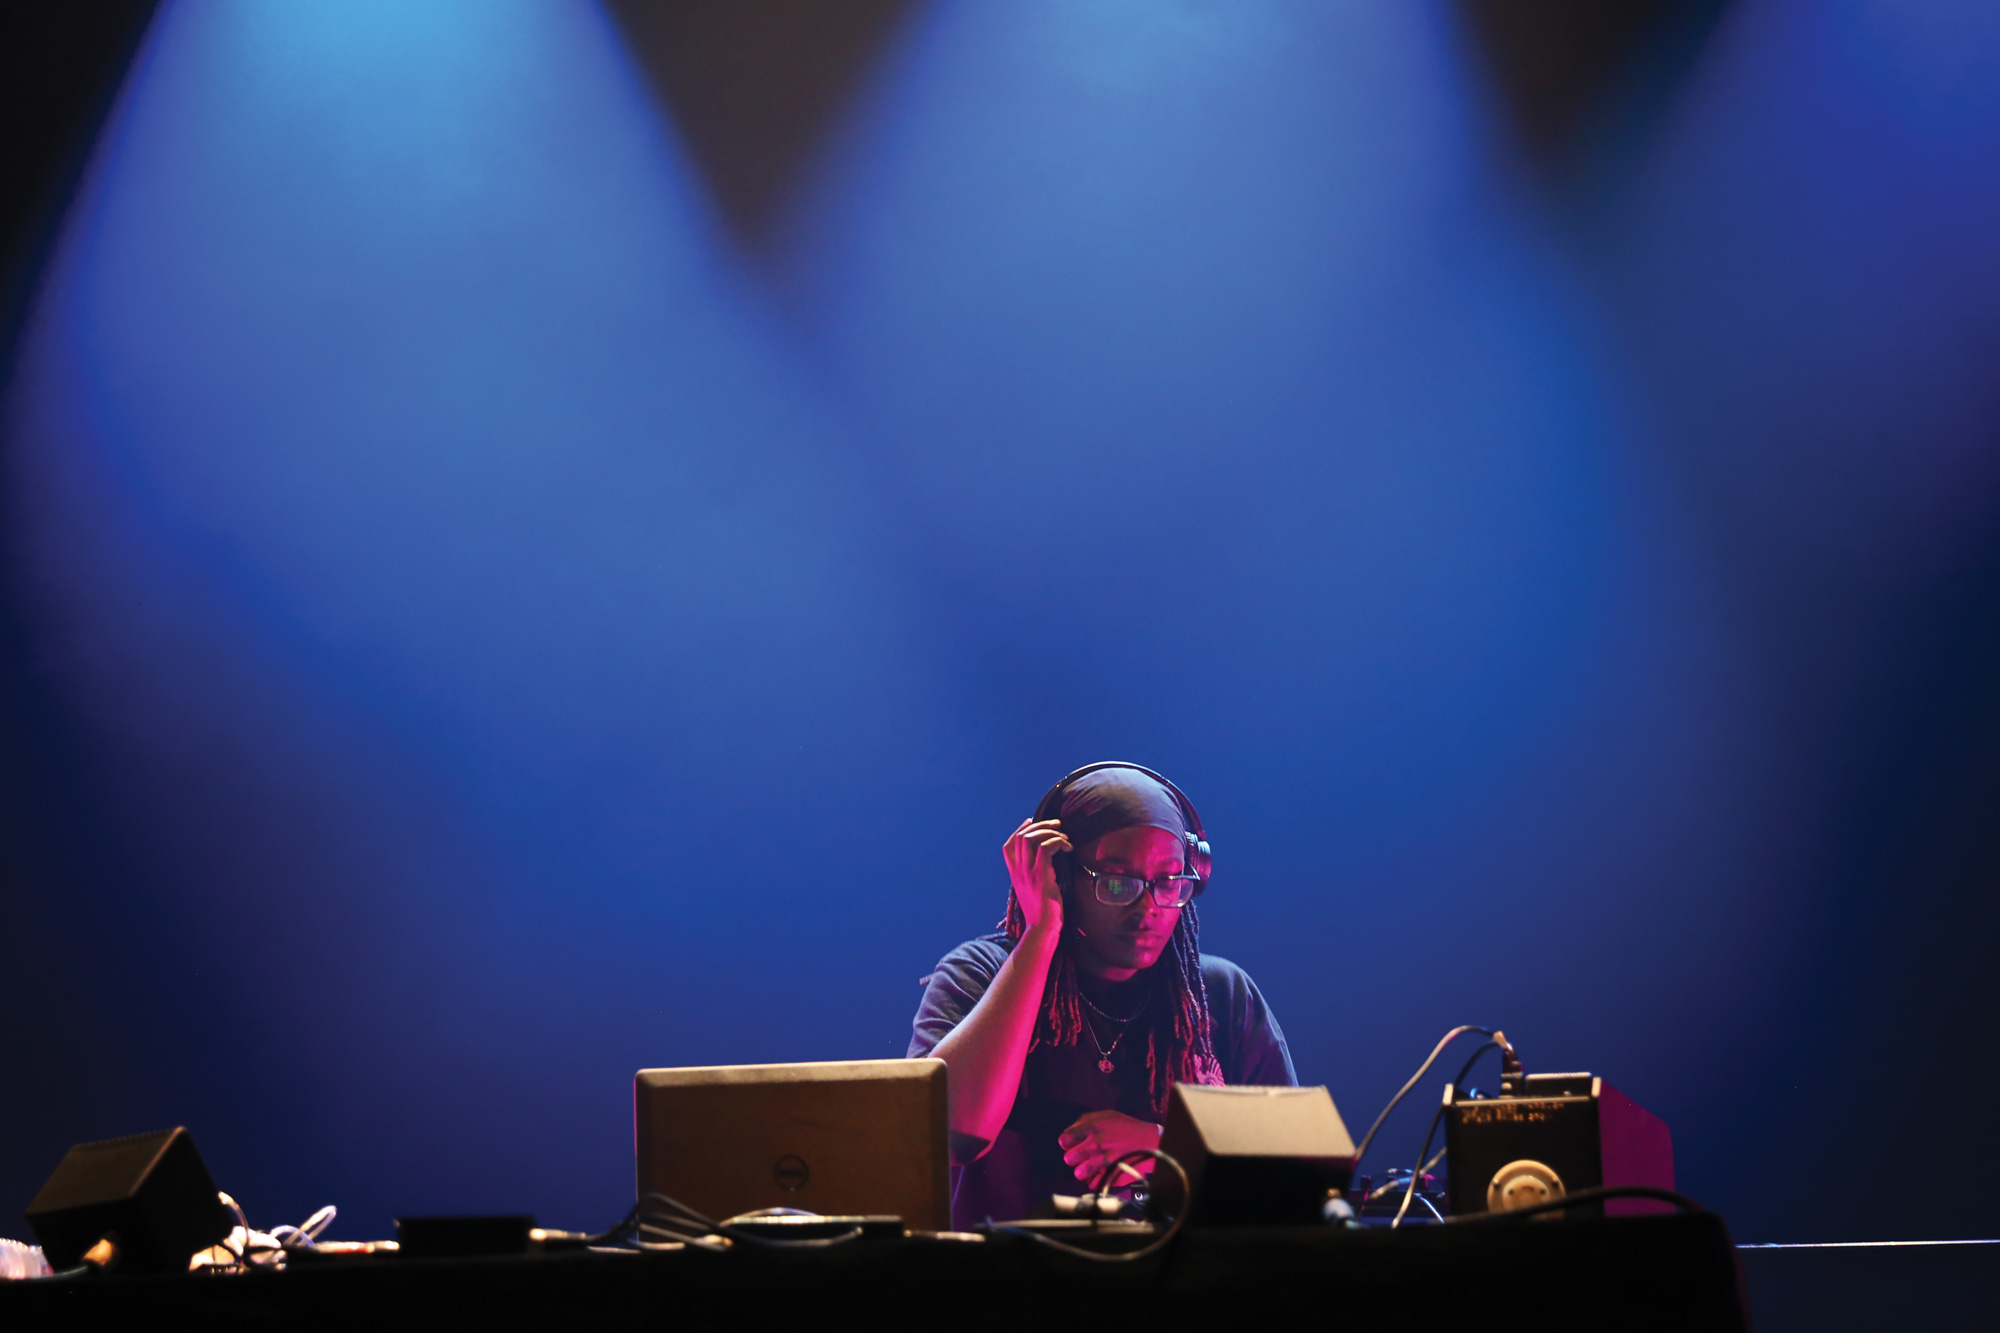 A Black person wearing glasses with their hand on one ear of their headphones, DJing in front of a wall of blue light. 